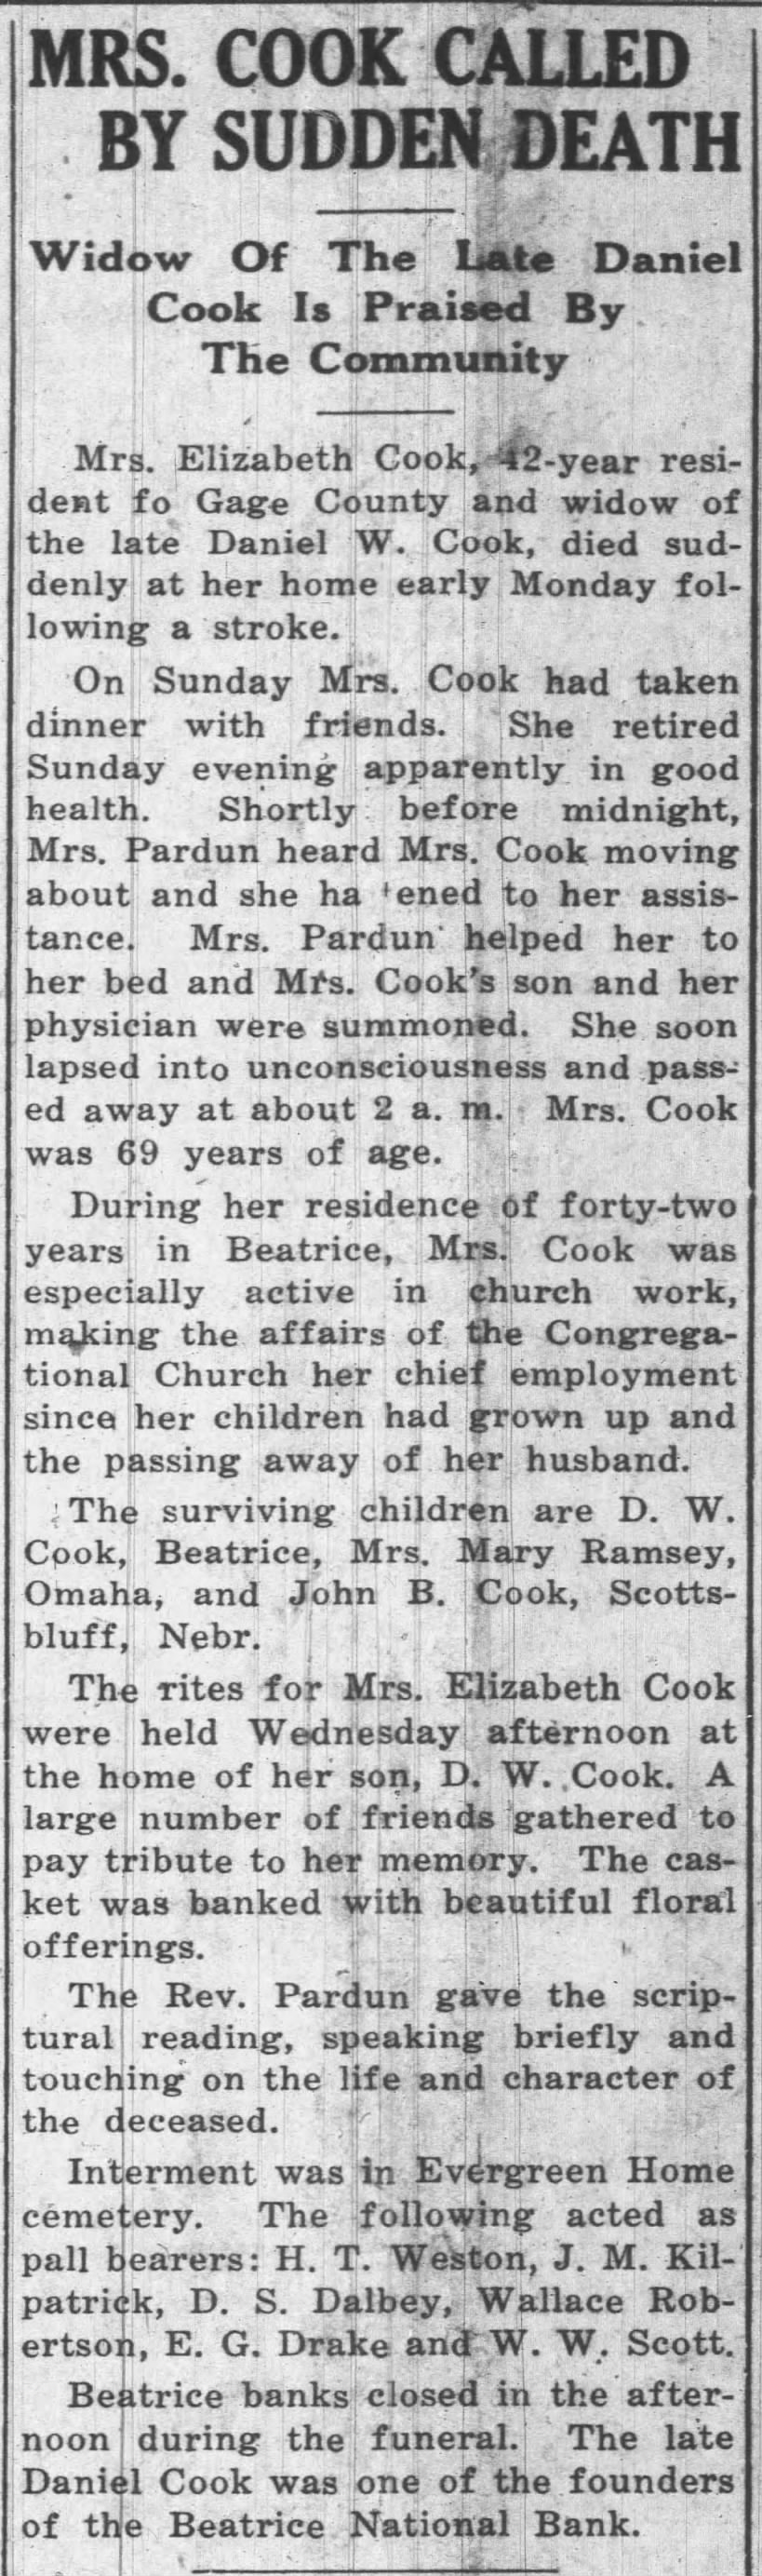 From the front page of the Thursday, Sept. 16, 1926 edition of The ...